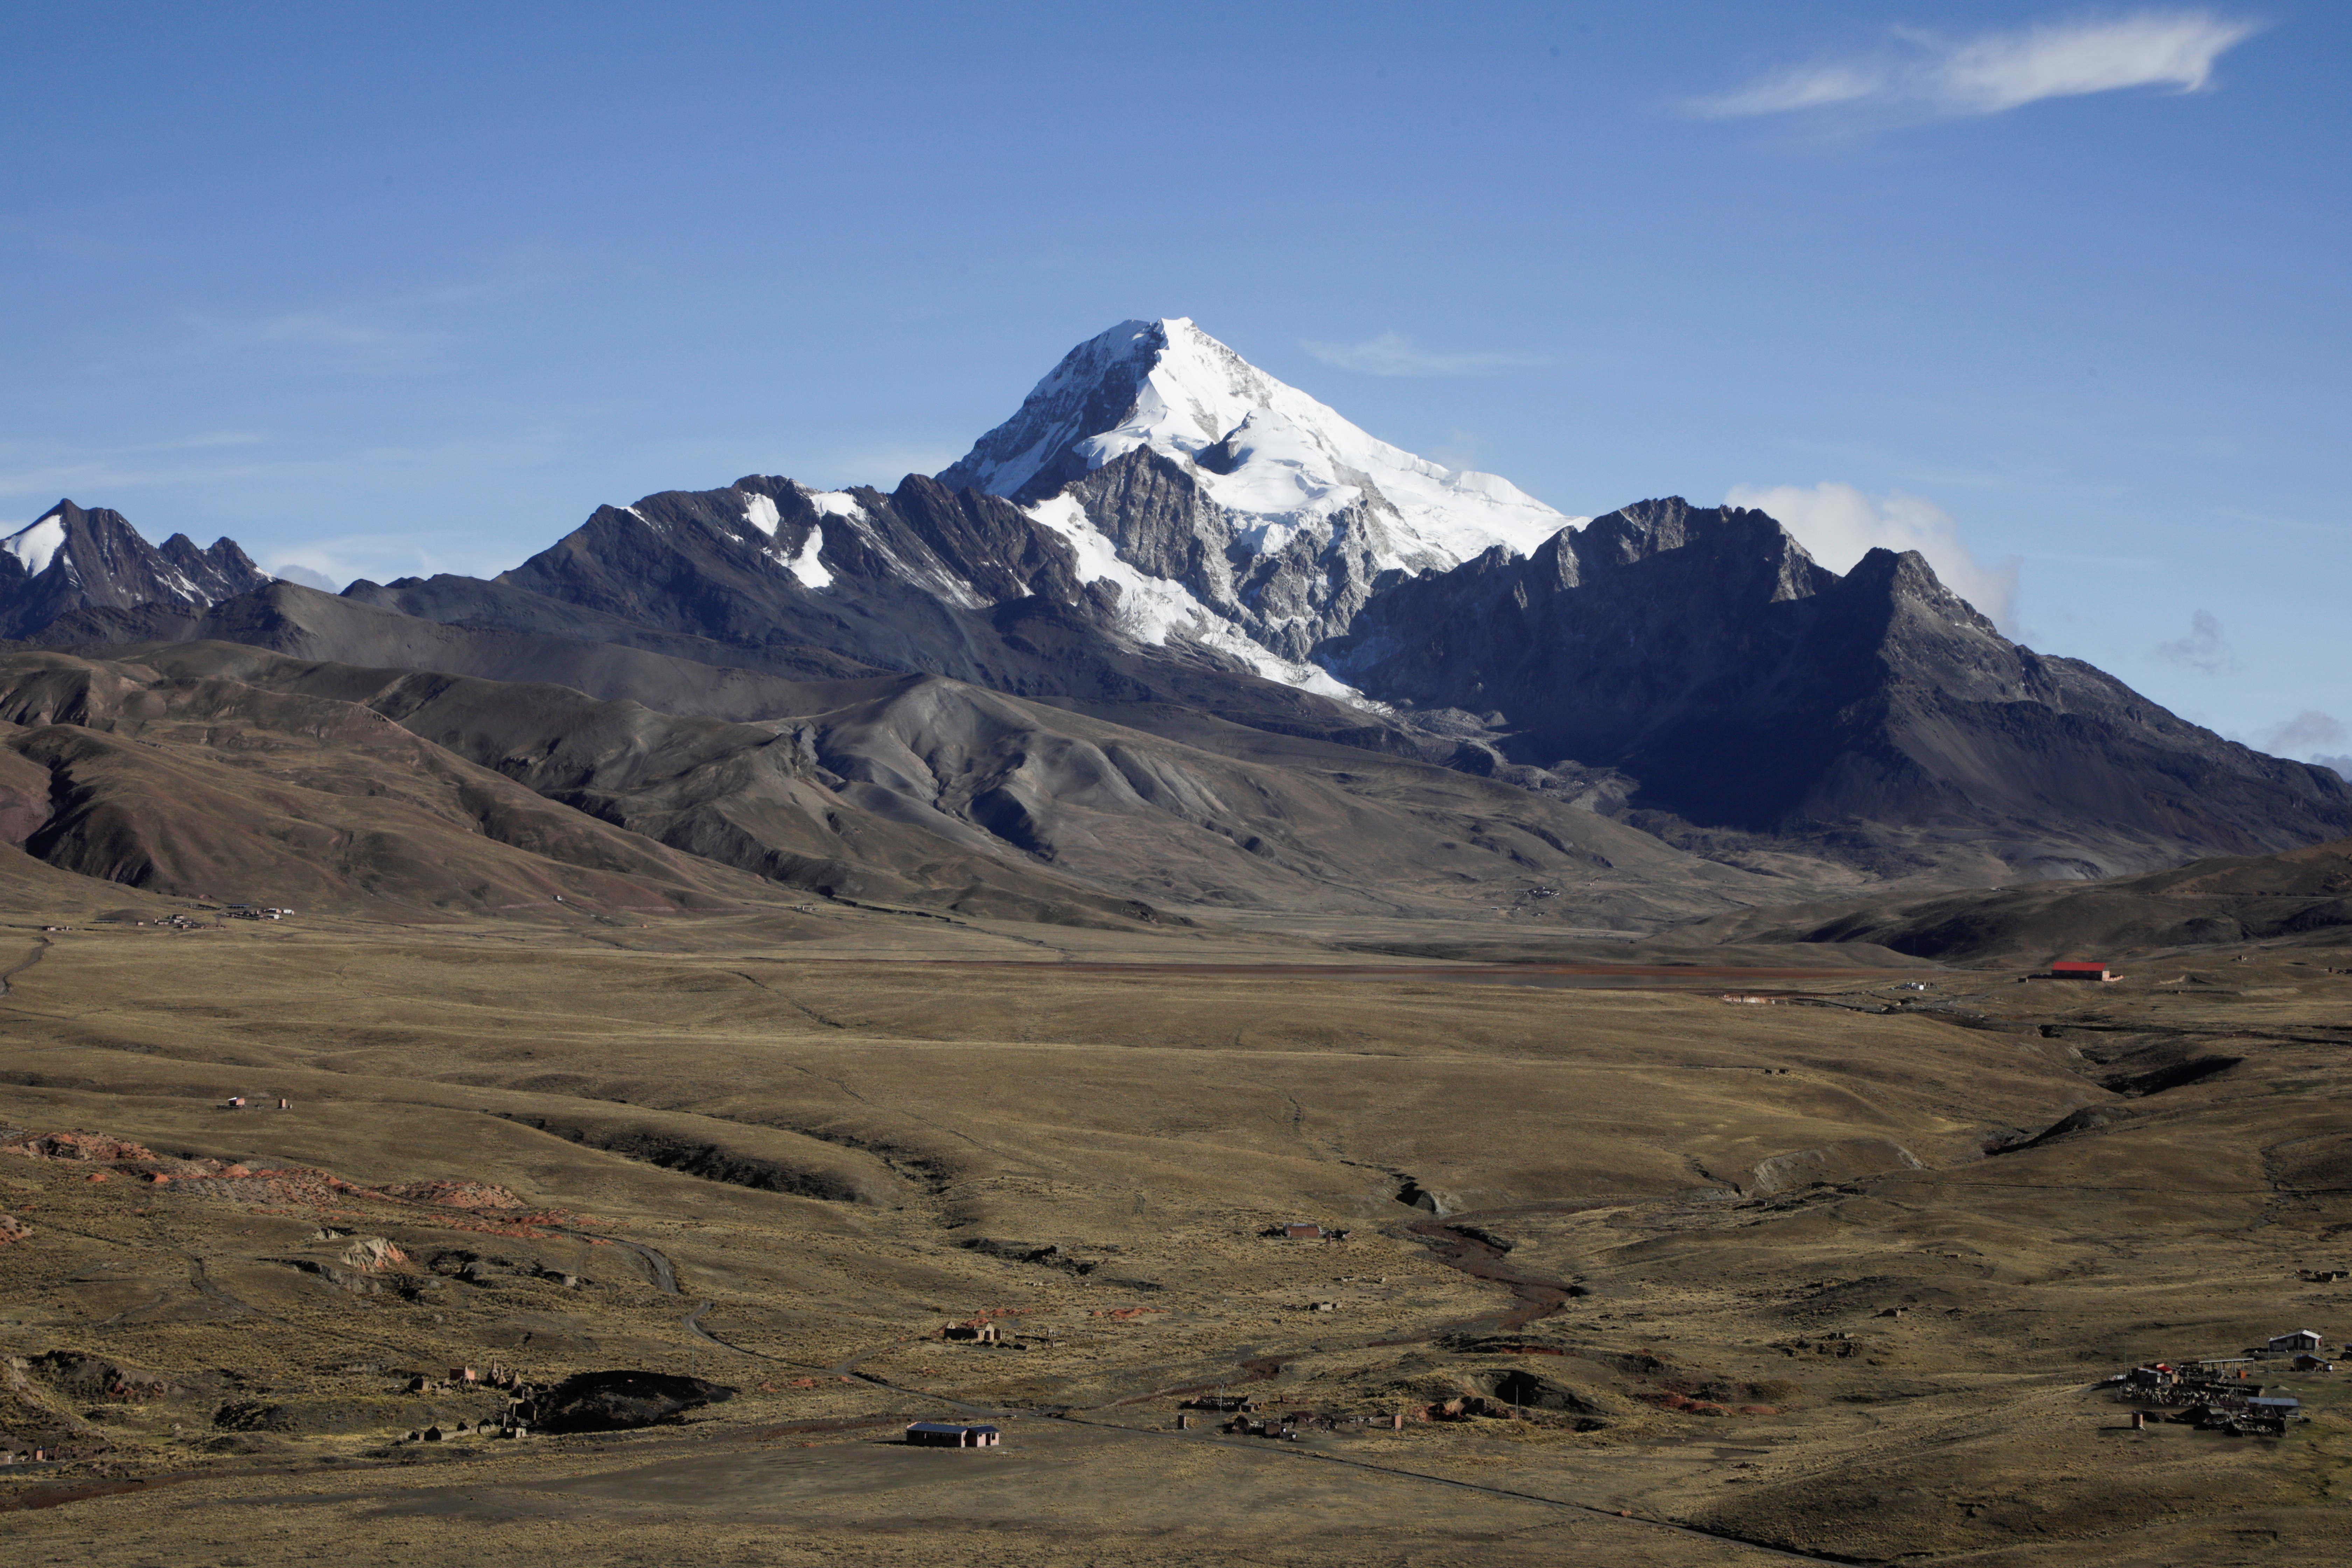 The Huayna Potosi mountain is seen without its glaciers and with little snow, in Milluni